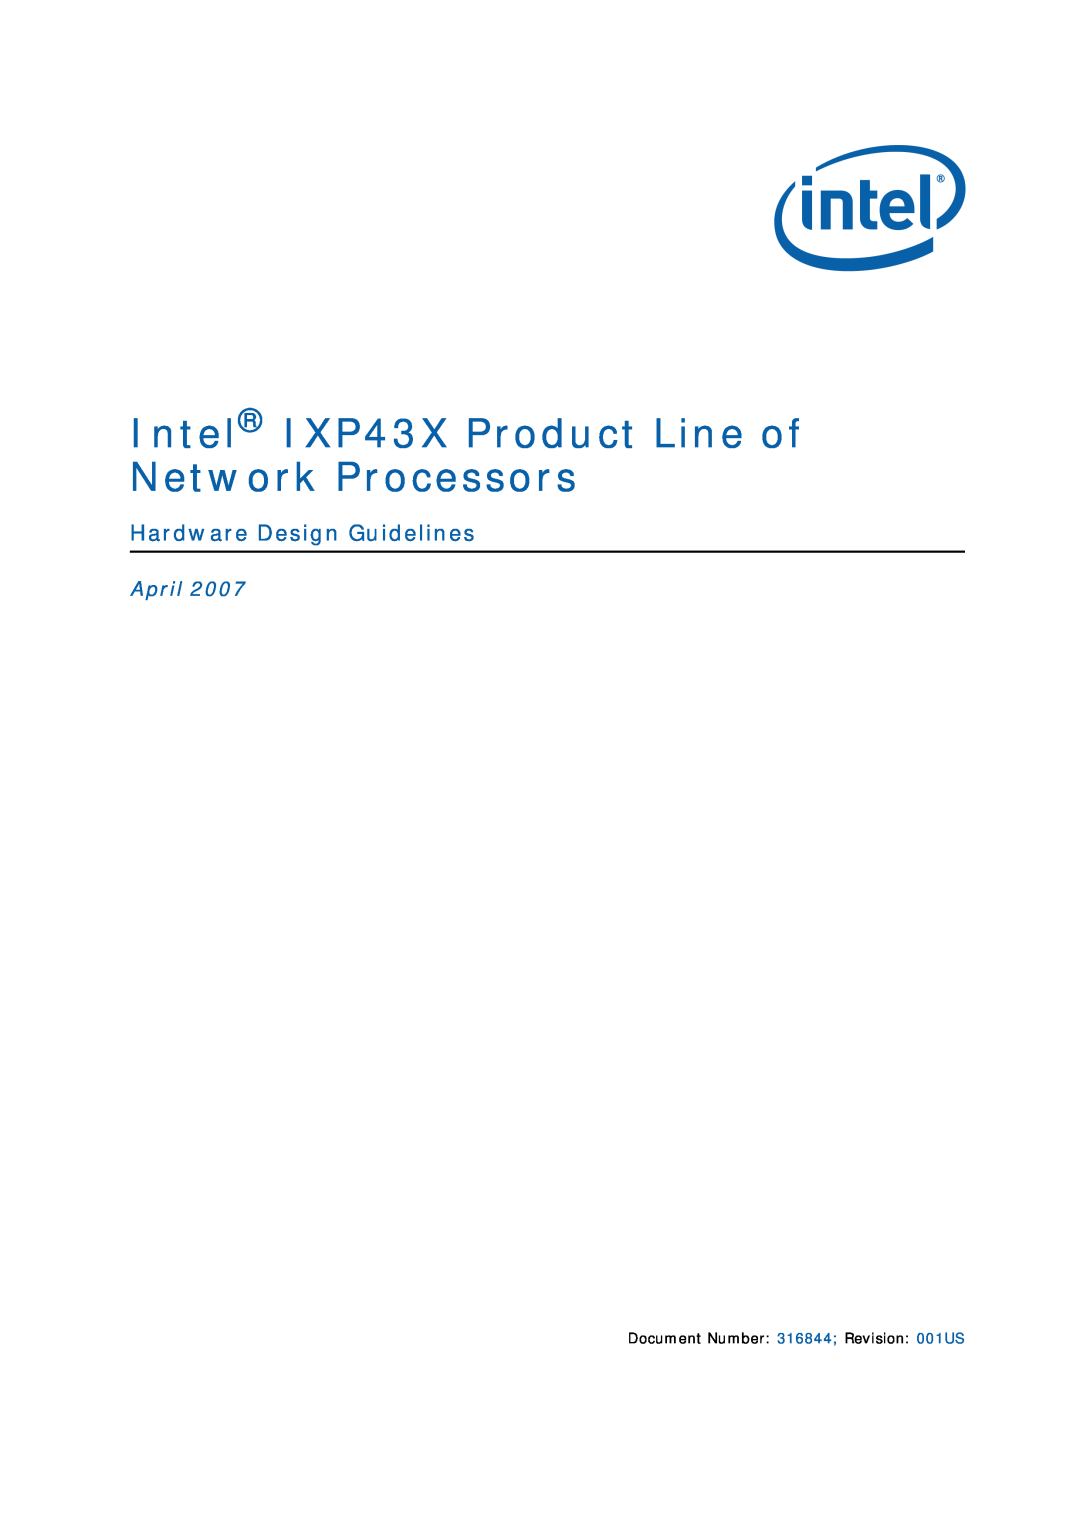 Intel manual Hardware Design Guidelines, Intel IXP43X Product Line of Network Processors, April 